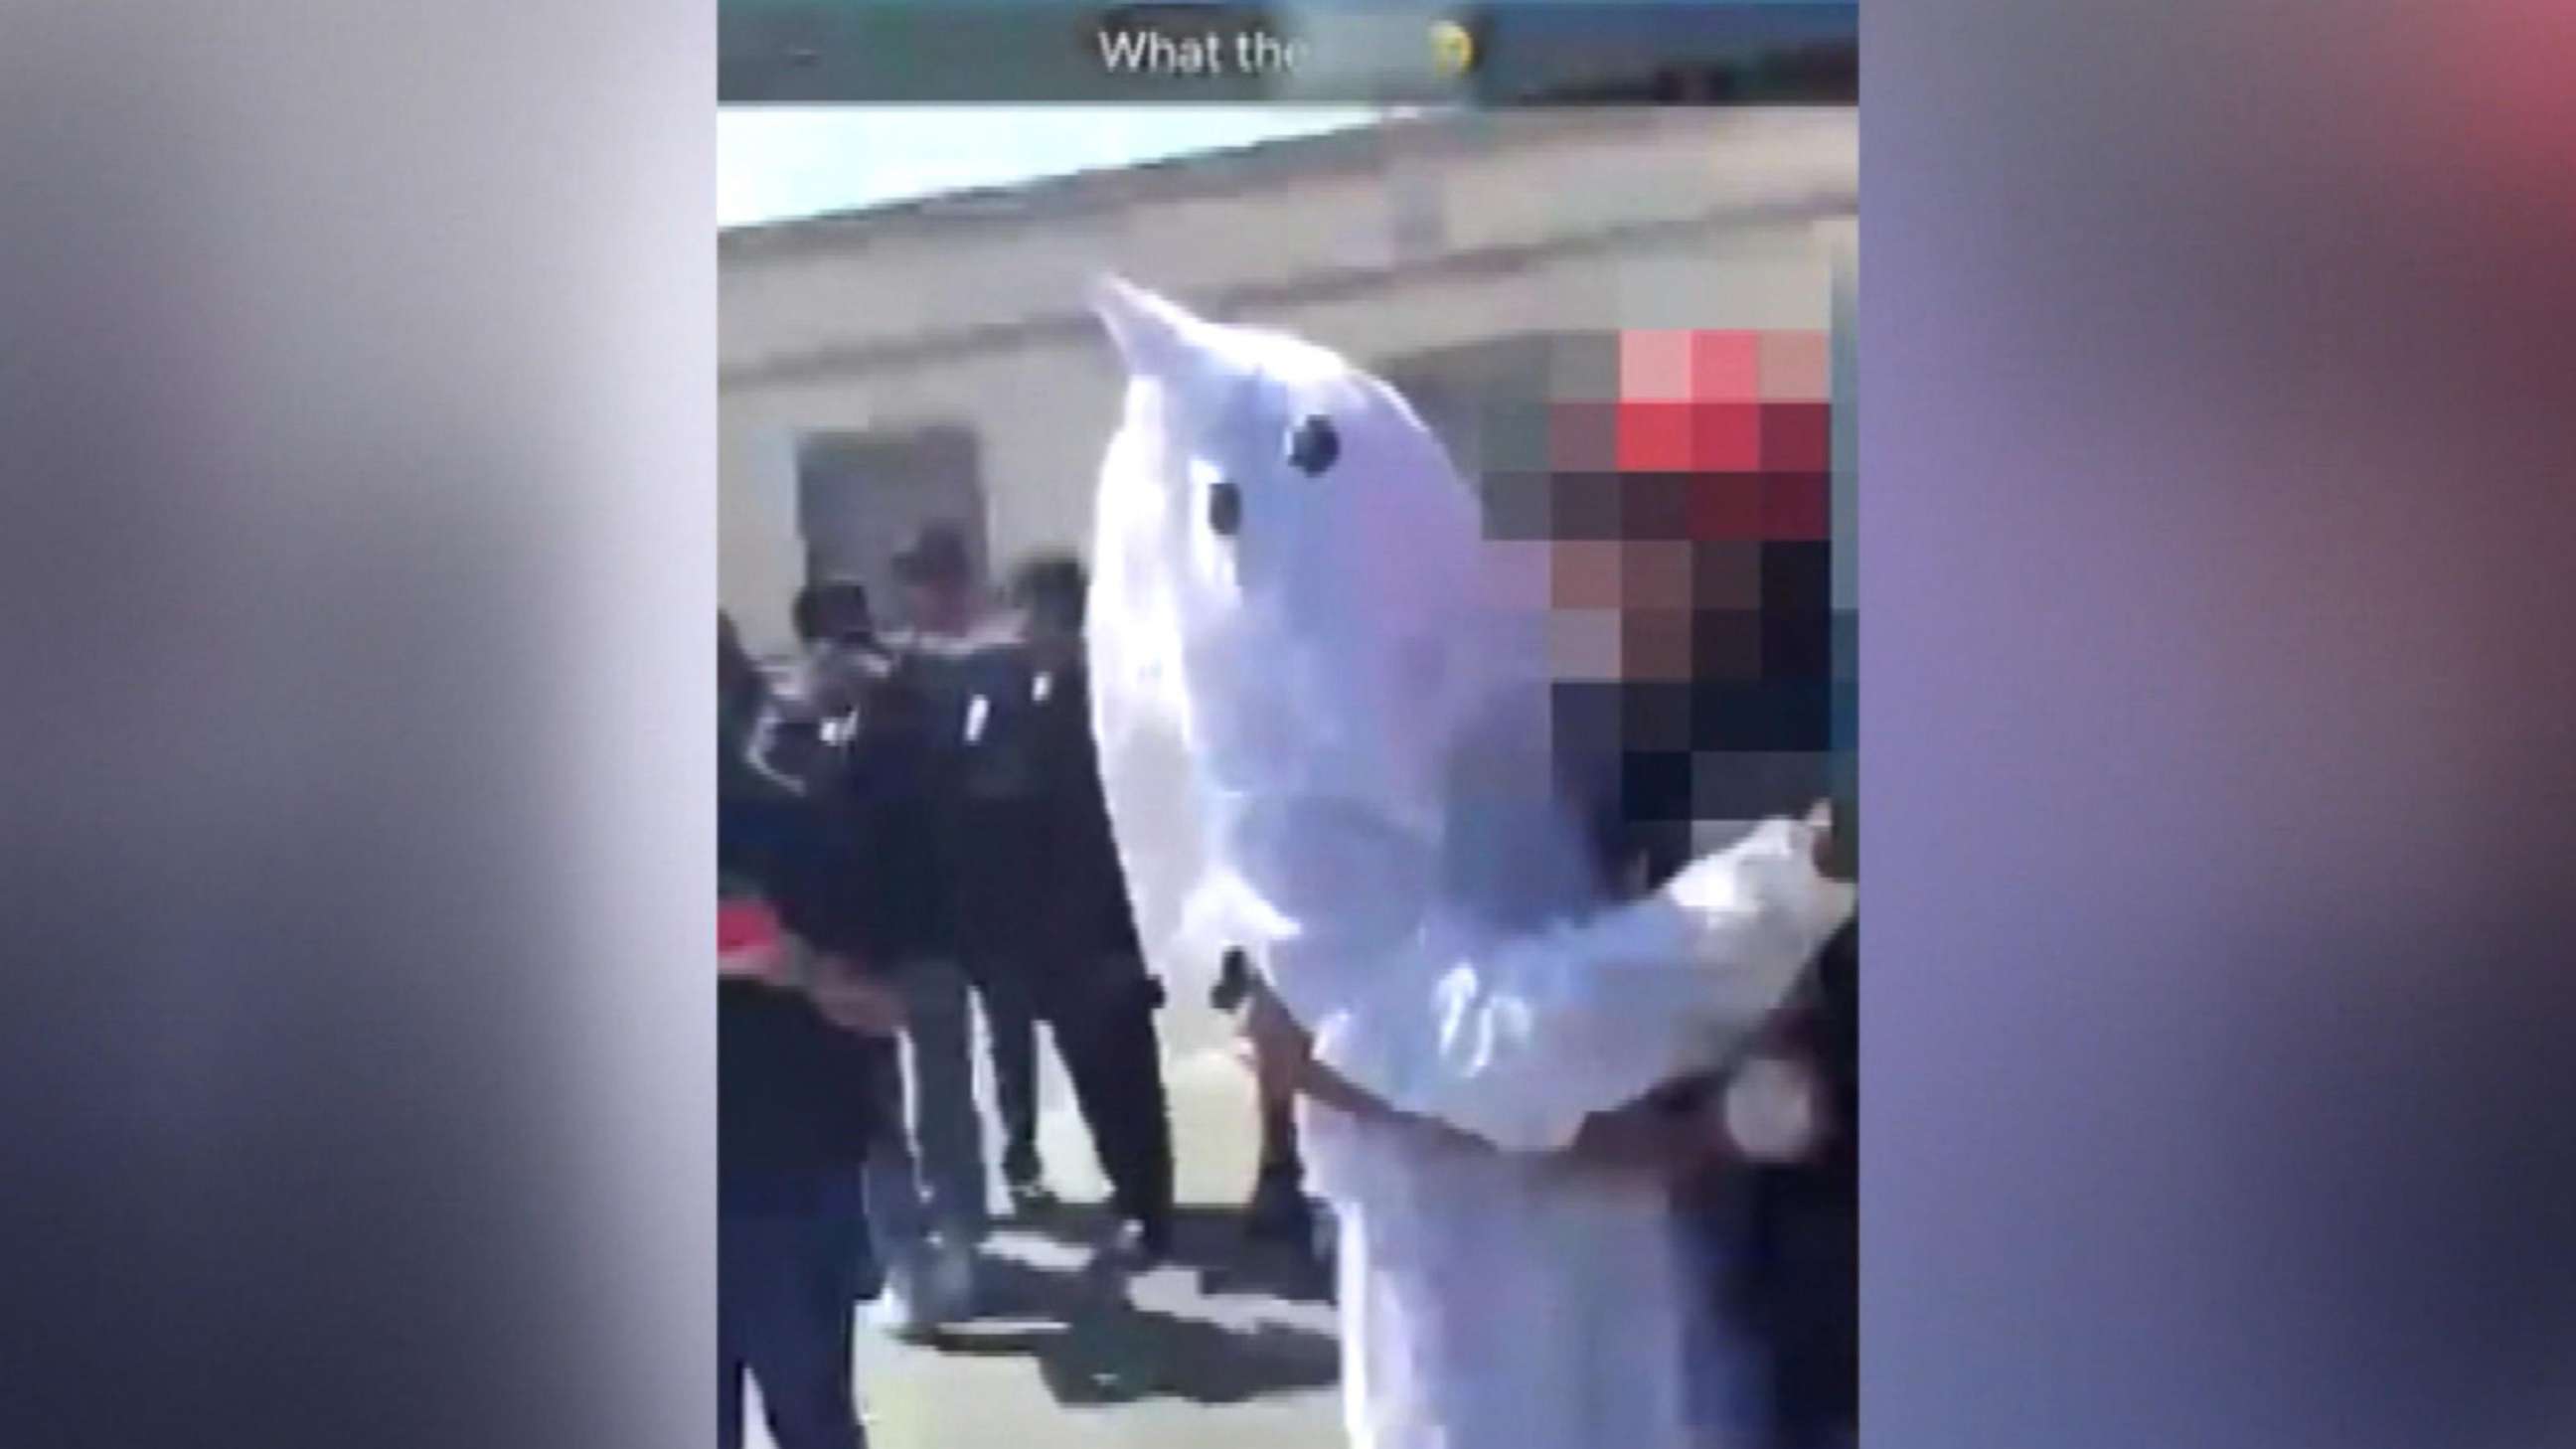 High school freshman's KKK outfit for school project 'rattled